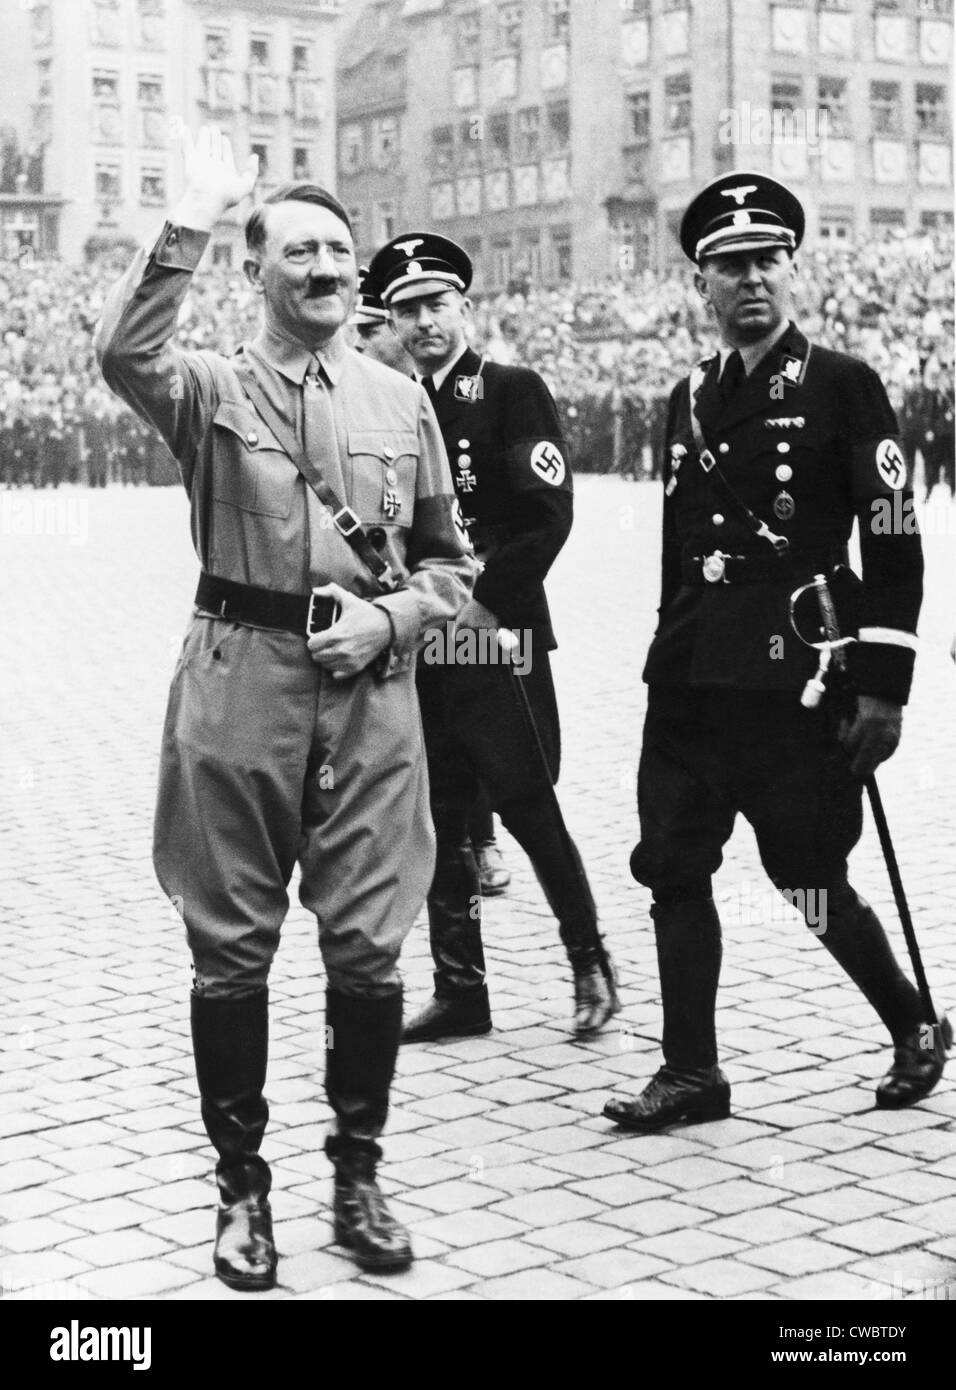 Adolf Hitler saluting, with two SS generals in uniform behind him, at Nazi Party Day, Nuremberg, Germany. 1937. Stock Photo